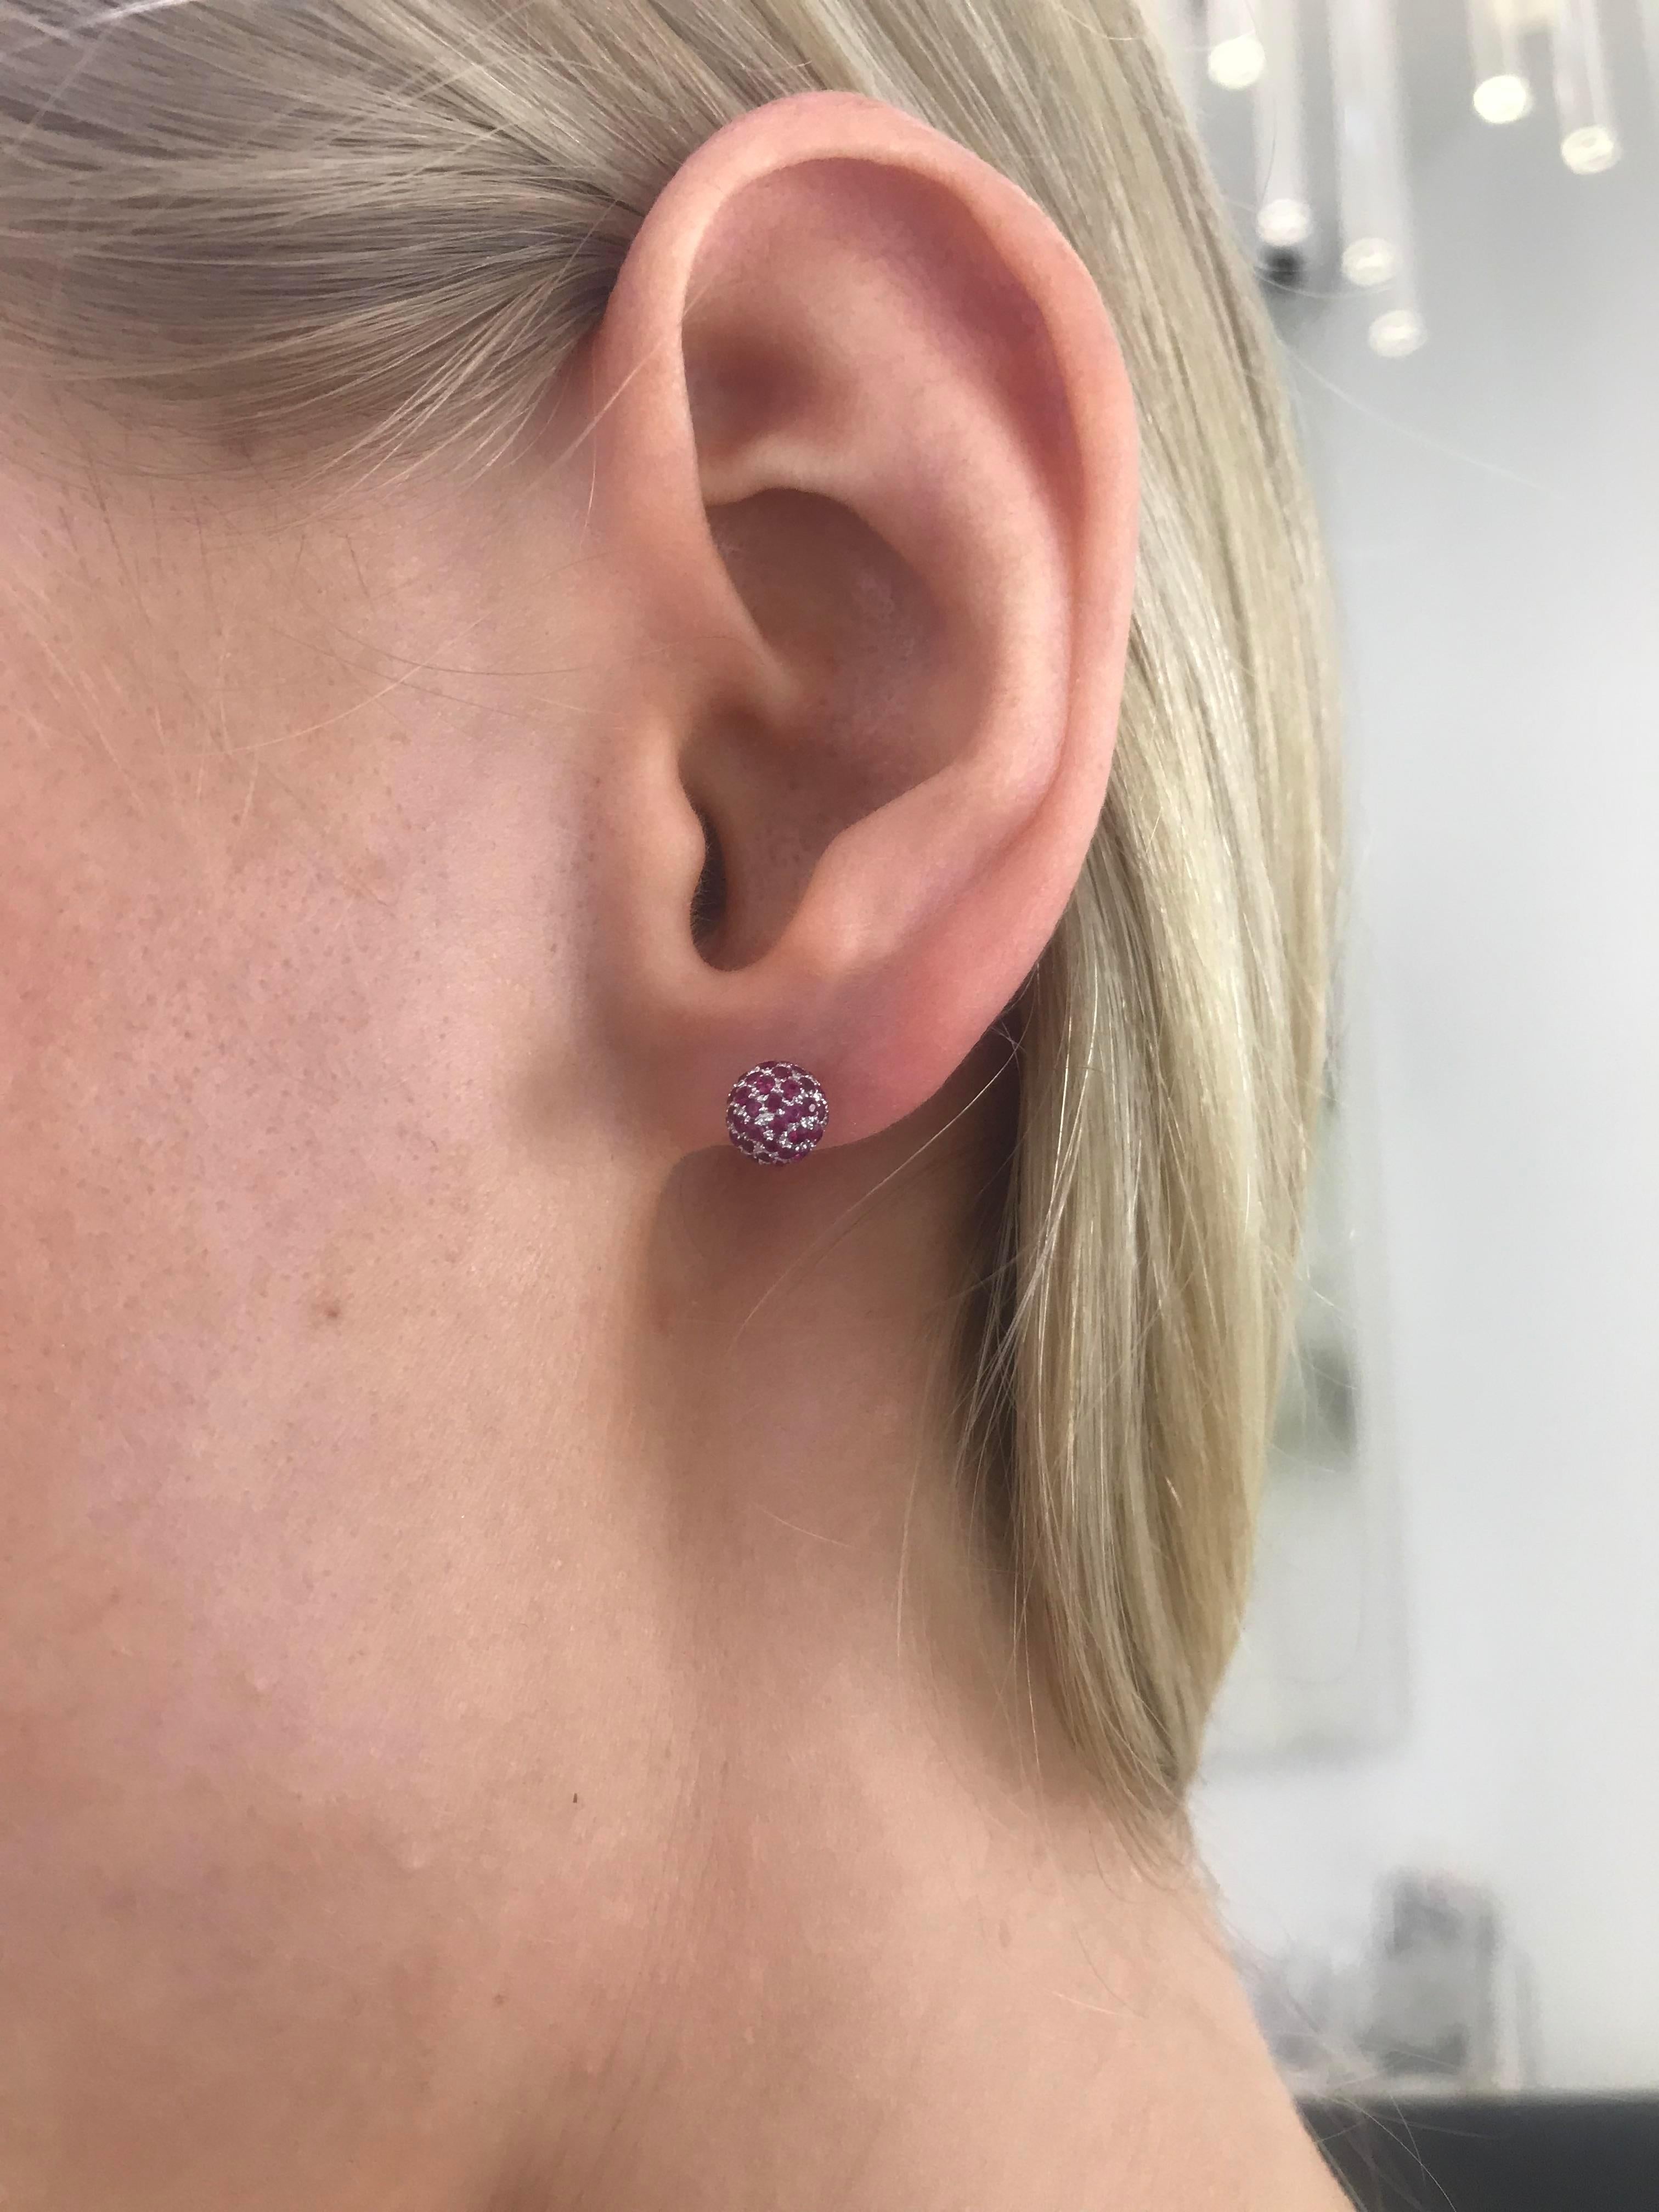 These Beautiful 1.02 Carat Round Deep colored Red Ruby Pave Set Diamond Stud Earrings set perfectly in 18 Karat White Gold. These stunning earrings are perfect for any occasion. British Hallmarked. 